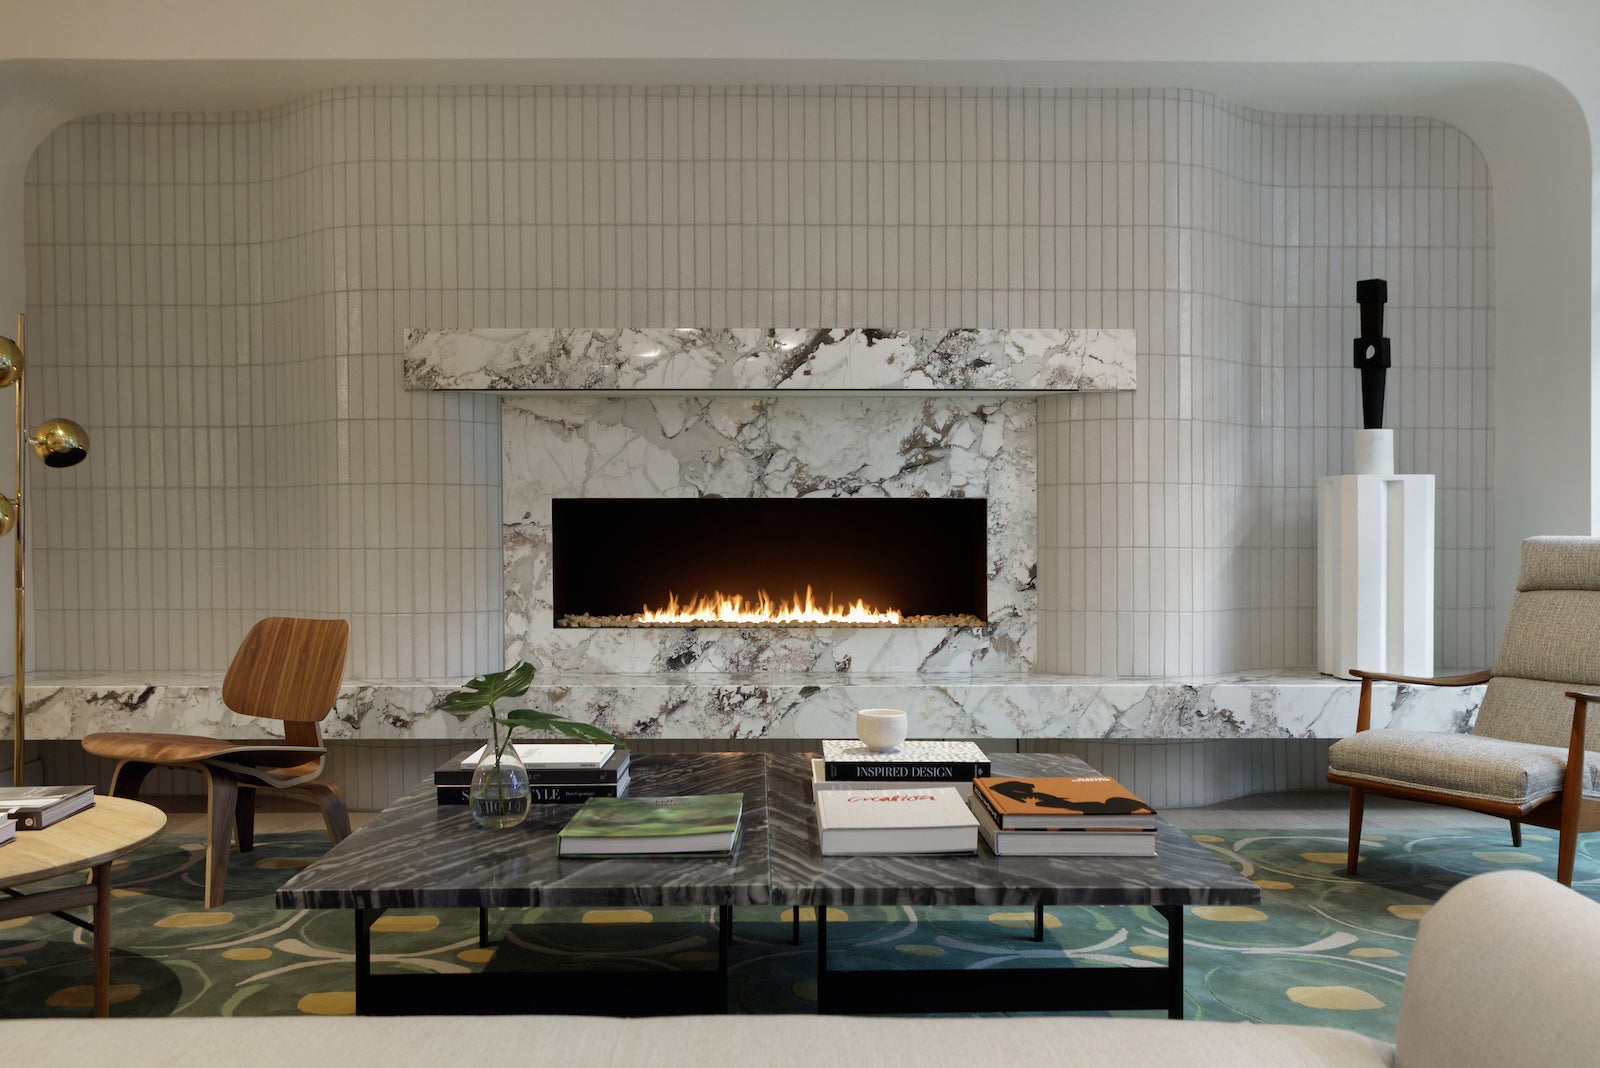 marble fireplace in hotel lobby surrounded by chairs